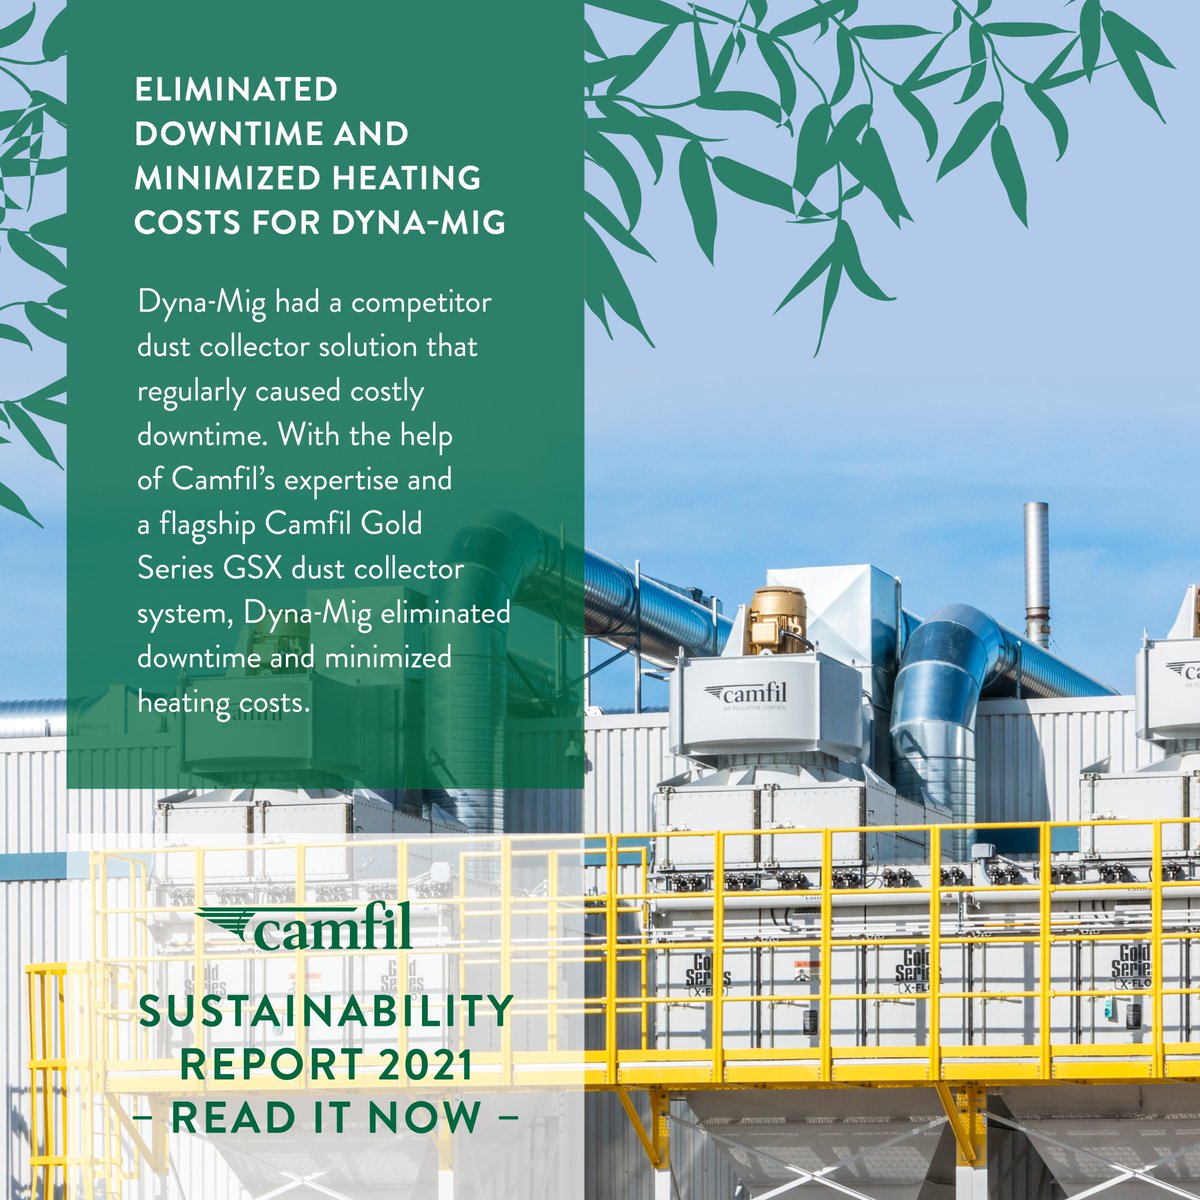 The Camfil 2021 sustainability report highlights how we minimize energy for our customers and support their sustainability journeys. Read the case study about Dyna-Mig which we eliminated downtime and minimized heating costs. https://t.co/bm1npK88HB. https://t.co/hP1mom7f6d